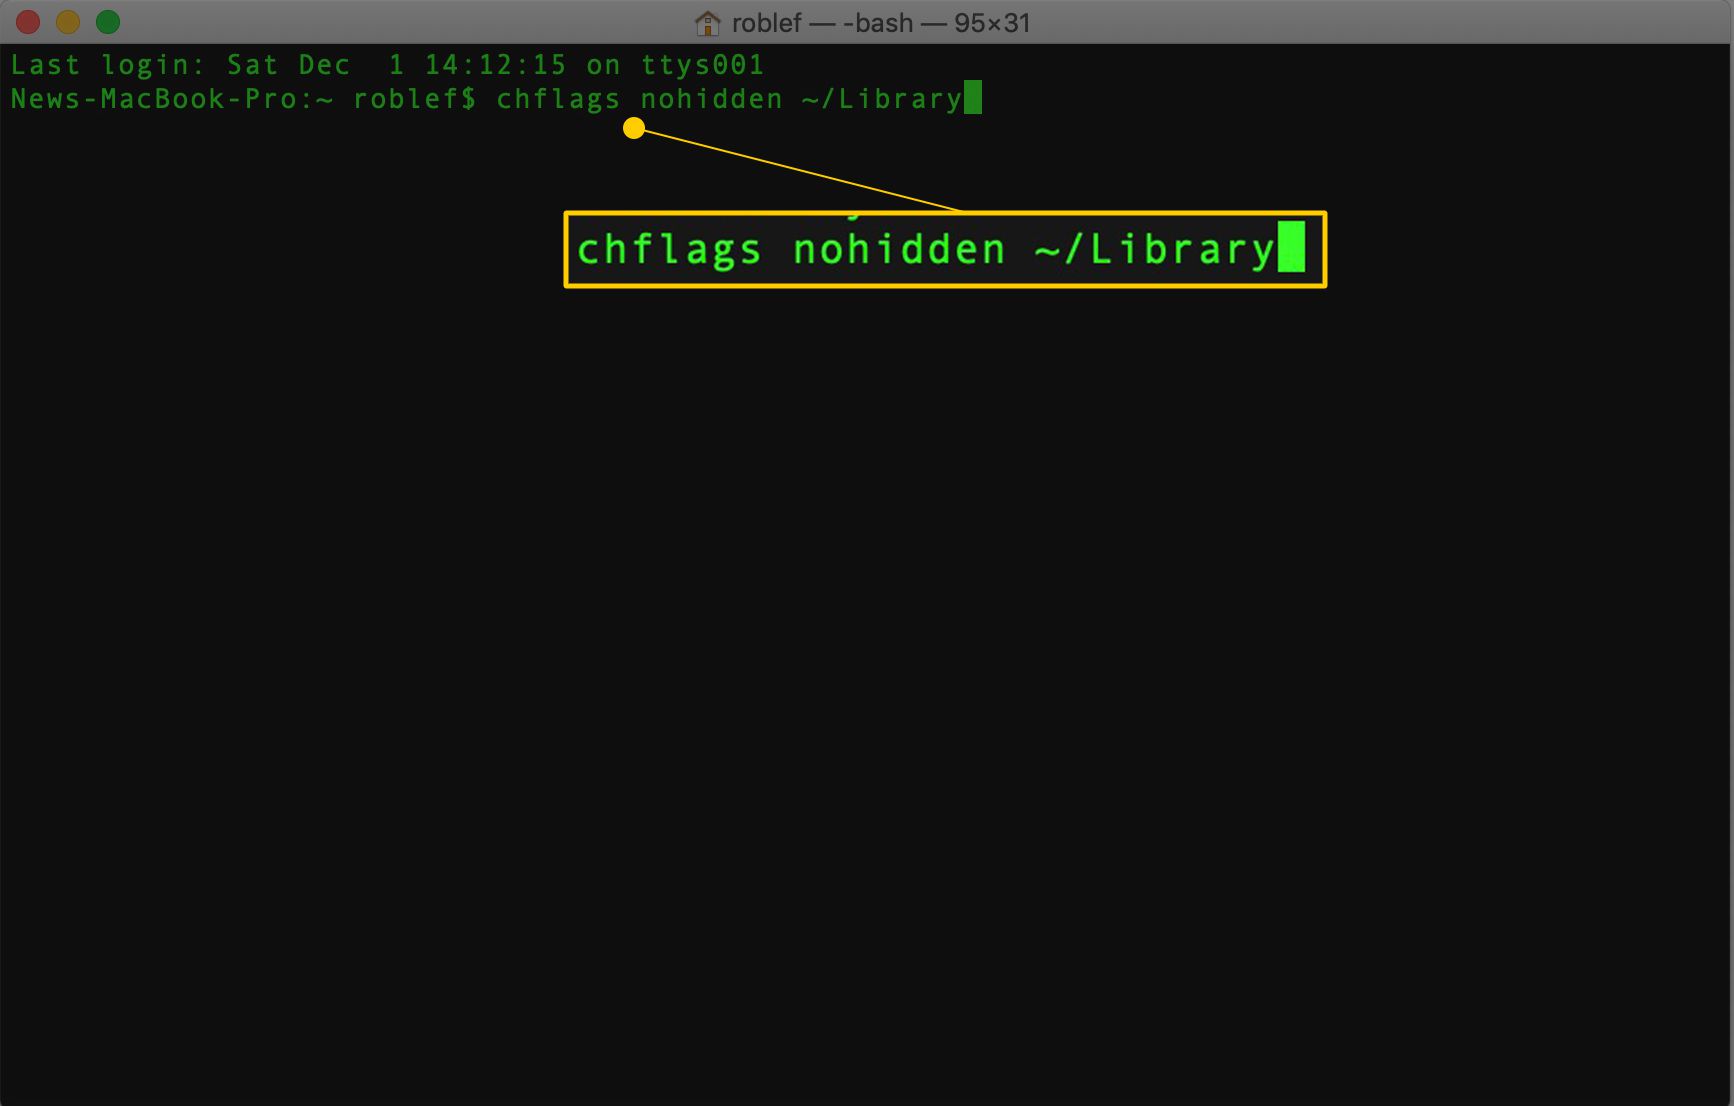 chflags nohidden ~/Library-opdracht in macOS Terminal-app